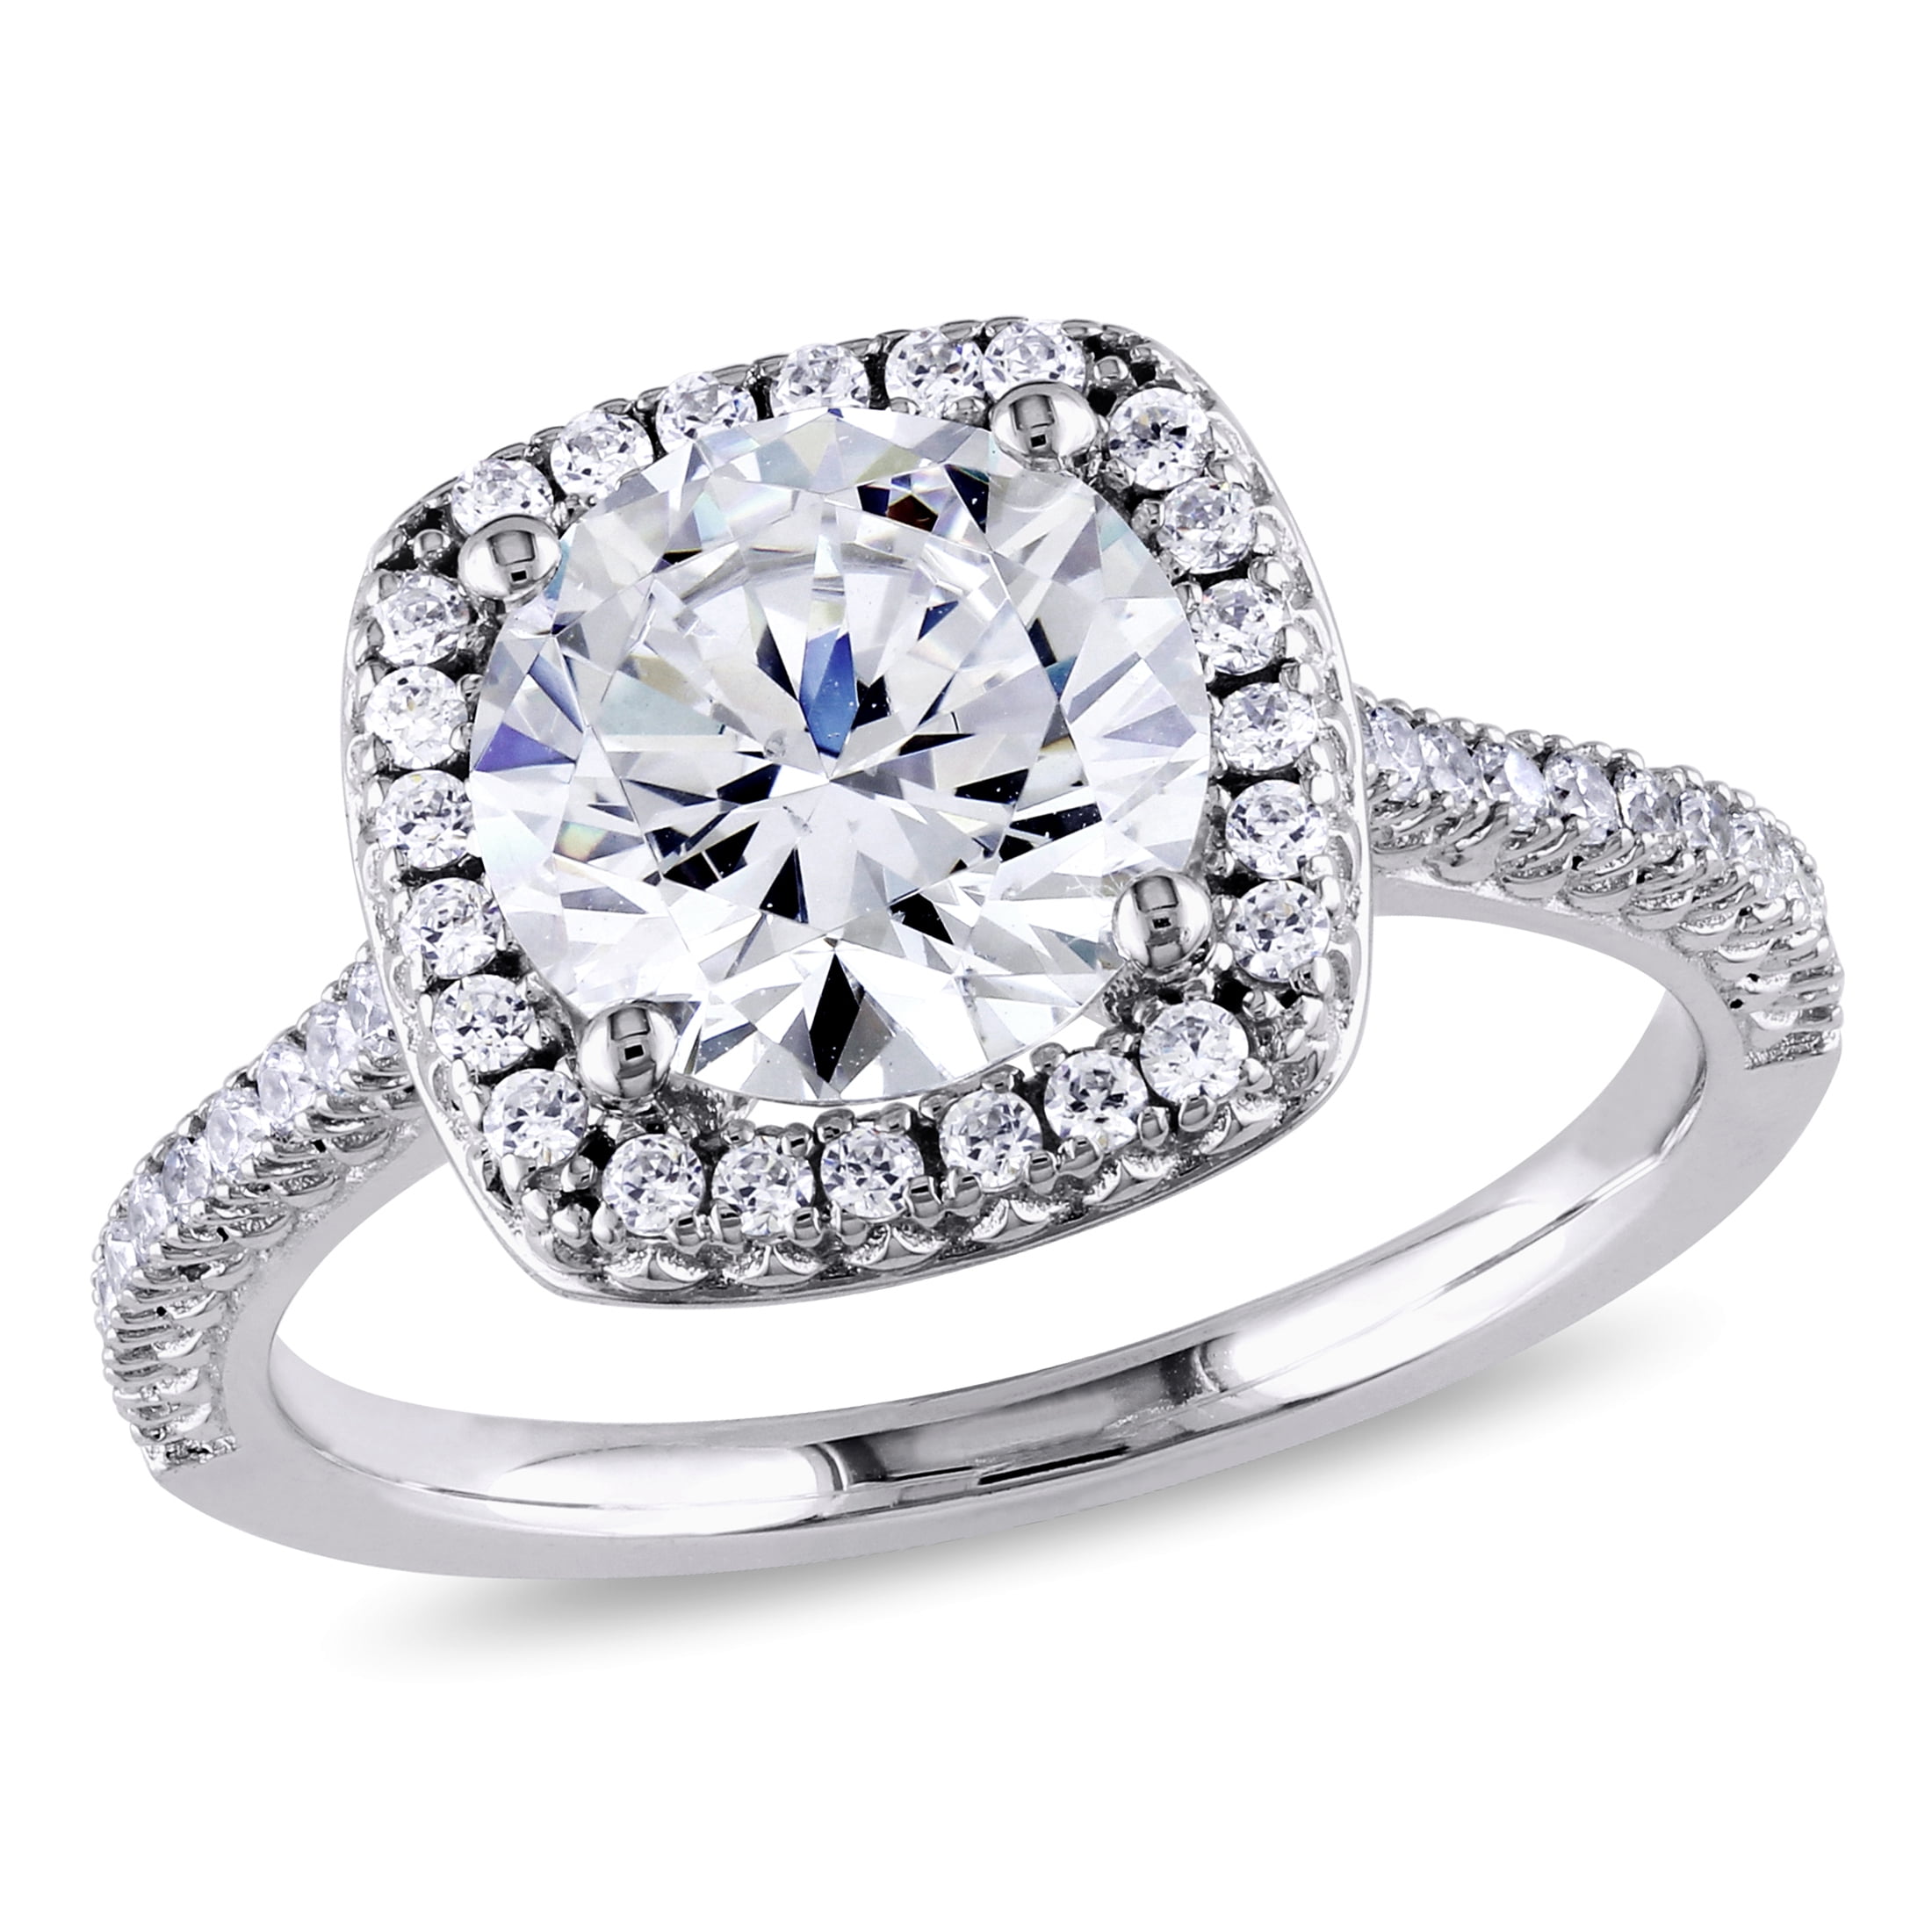 3ct CZ Marquise Cut Solitaire Halo Promise Engagement Ring Women White Gold Plated Size 5-9 